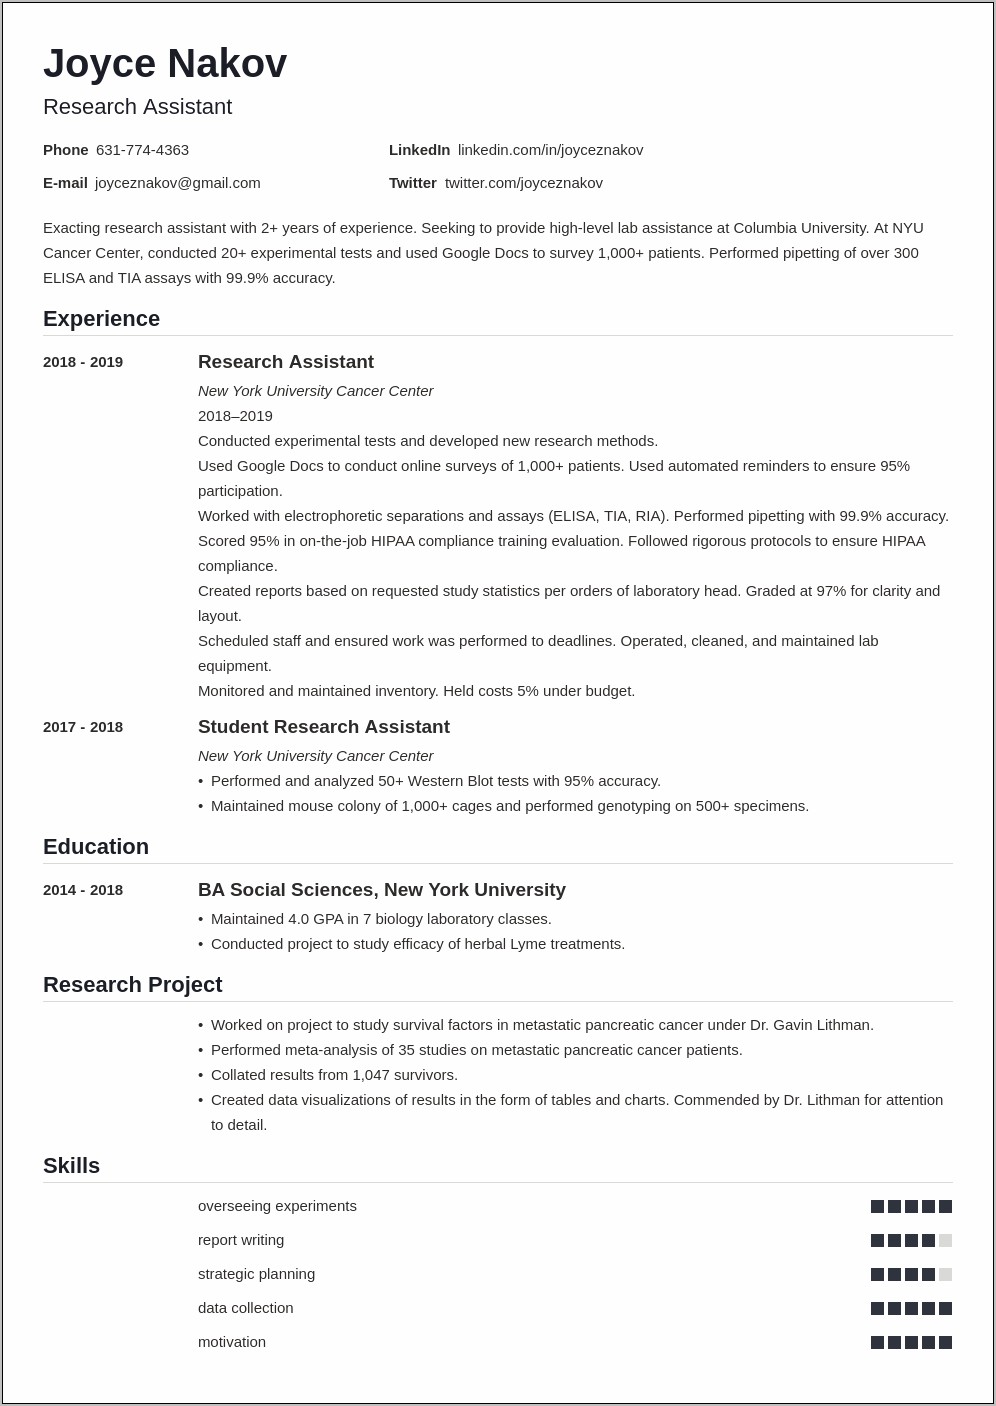 Research Skills To Put On Resume